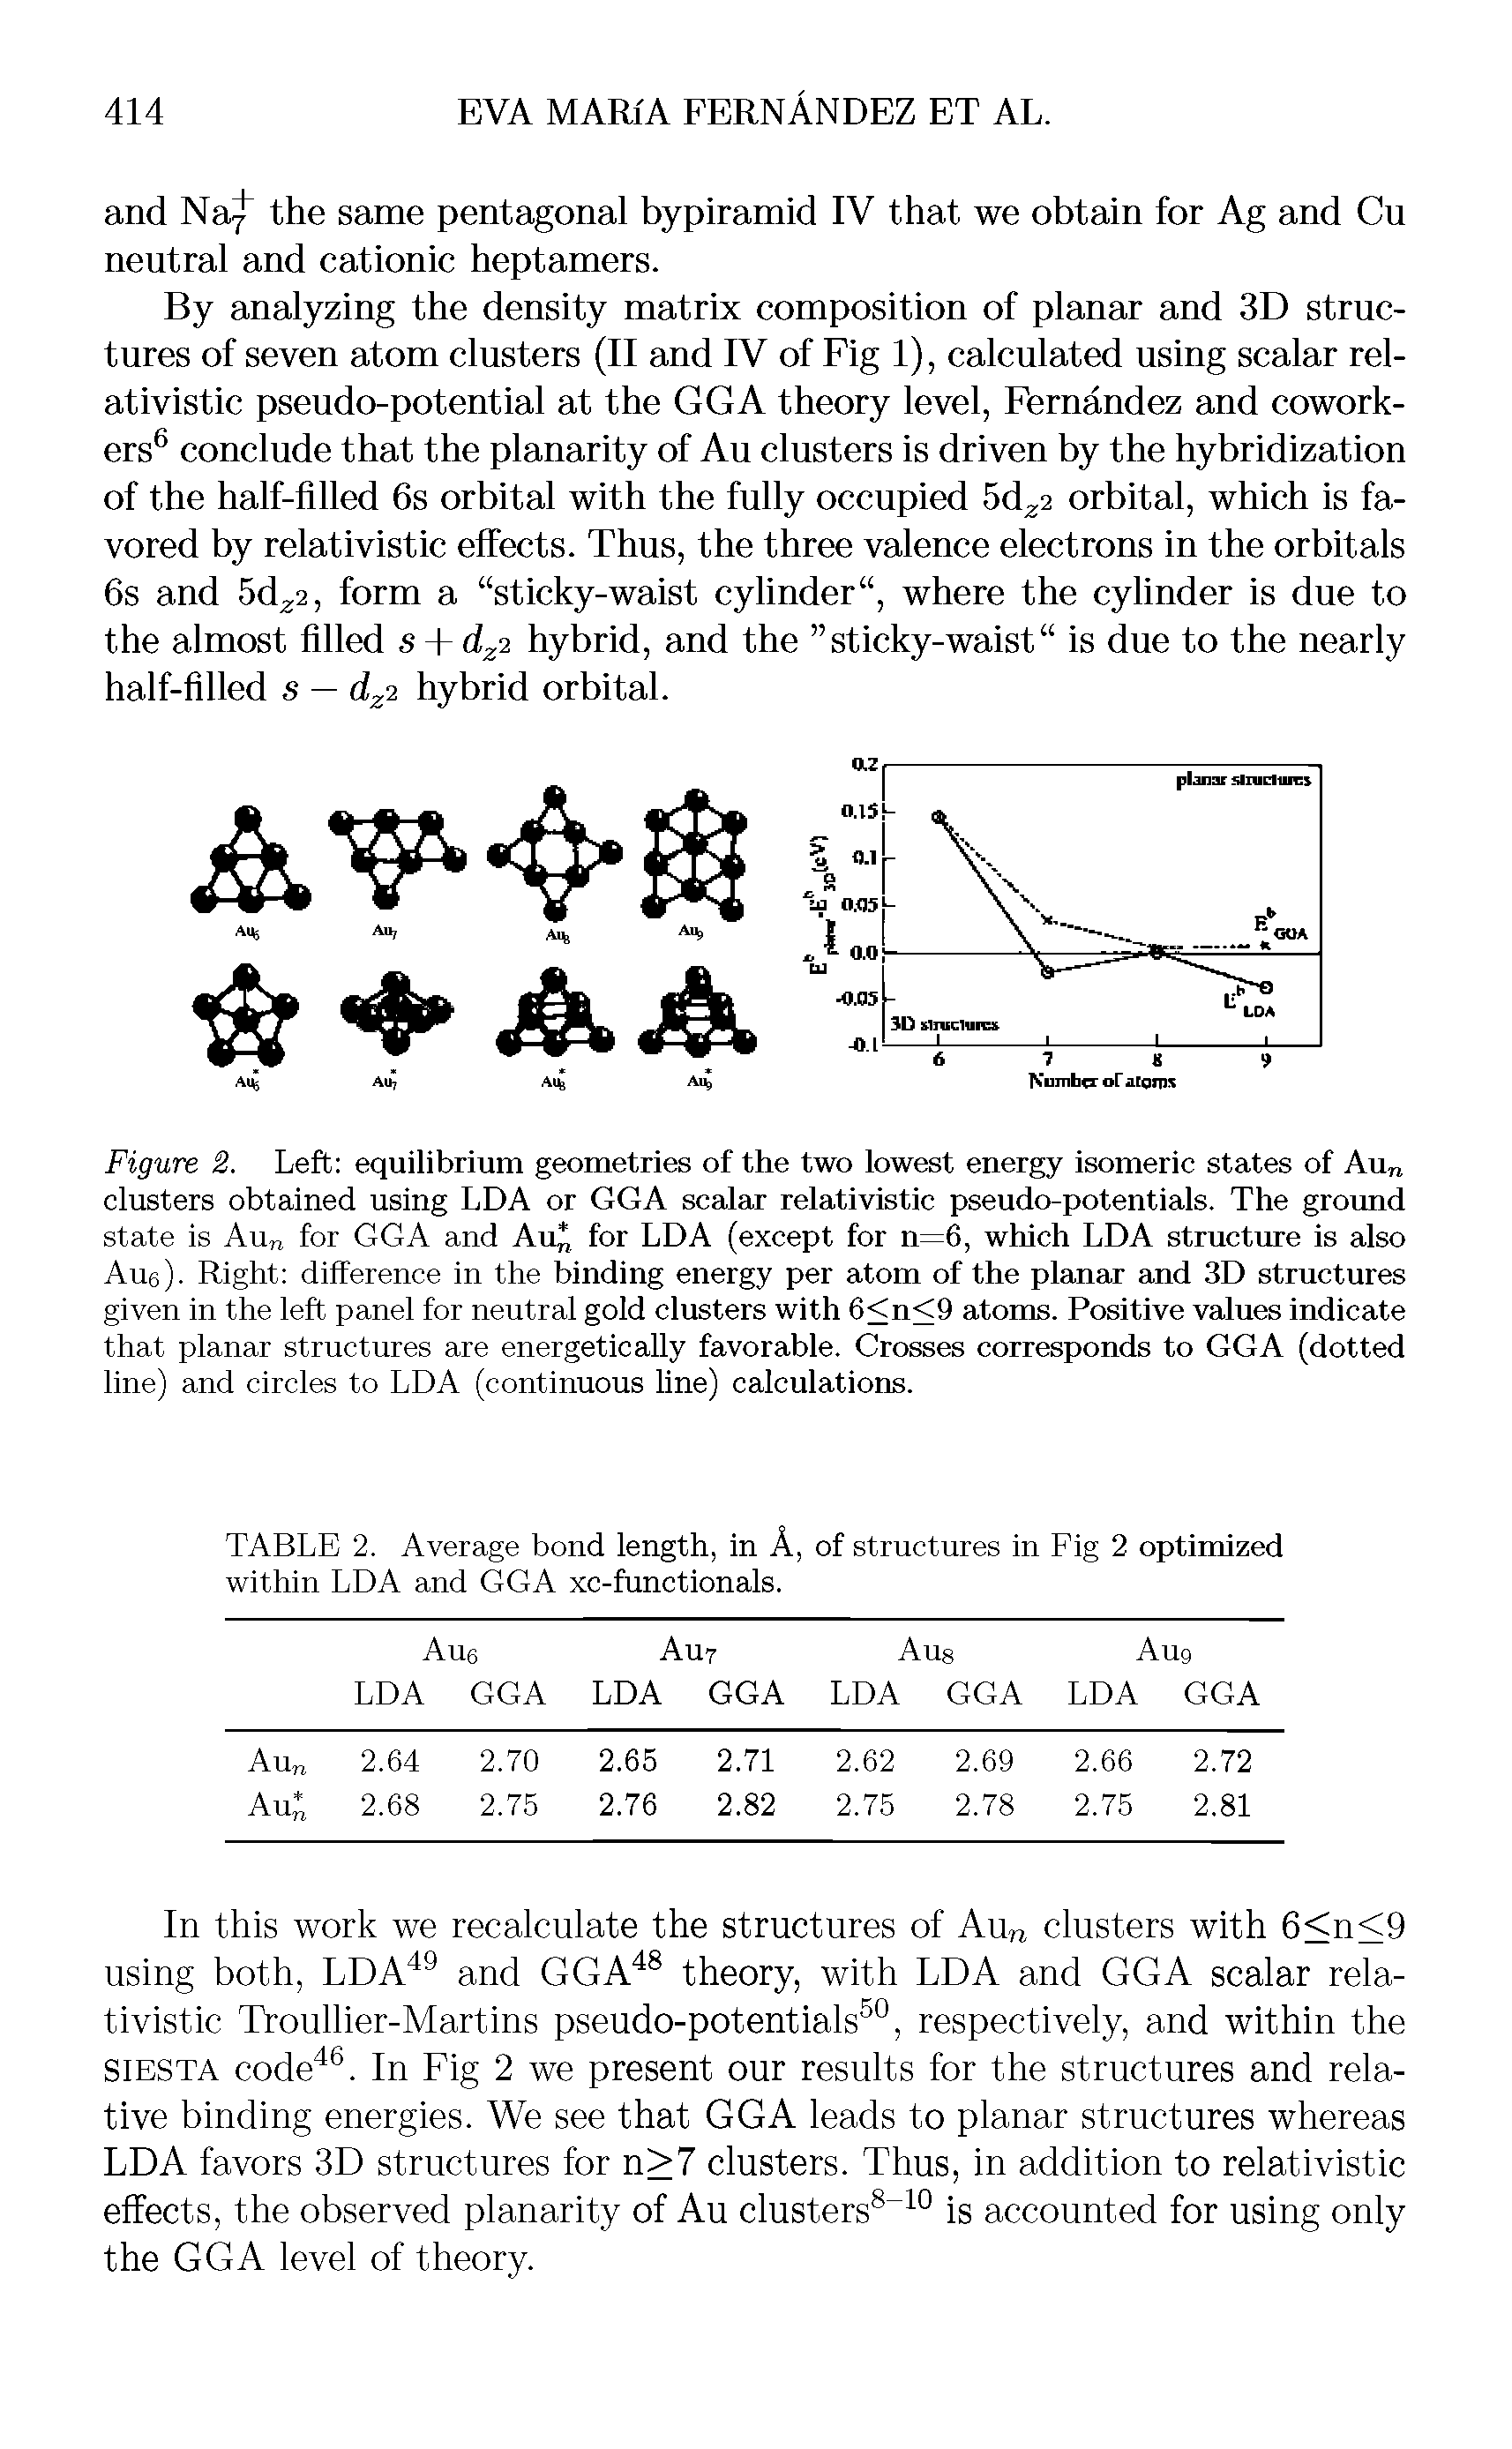 Figure 2. Left equilibrium geometries of the two lowest energy isomeric states of Au clusters obtained using LDA or GGA scalar relativistic pseudo-potentials. The ground state is Au for GGA and Auj for LDA (except for n=6, which LDA structure is also Aue). Right difference in the binding energy per atom of the planar and 3D structures given in the left panel for neutral gold clusters with 6<n<9 atoms. Positive values indicate that planar structures are energetically favorable. Crosses corresponds to GGA (dotted line) and circles to LDA (continuous line) calculations.